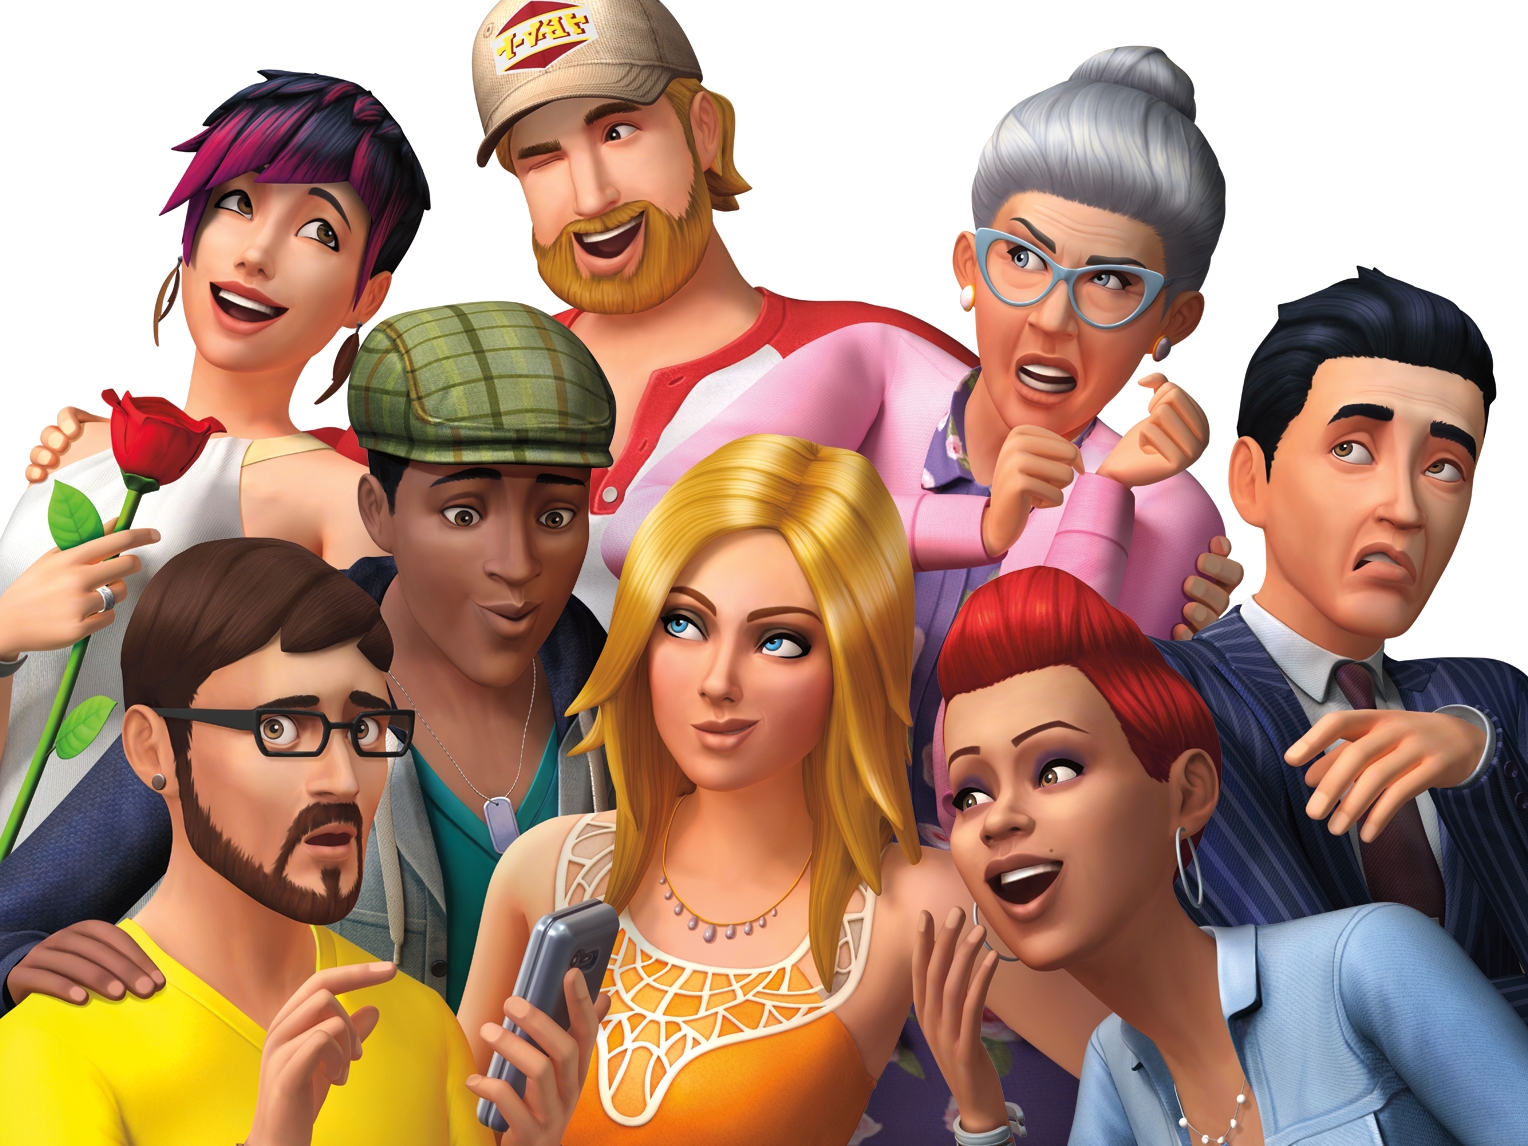 Video Game The Sims 4 HD Wallpaper | Background Image